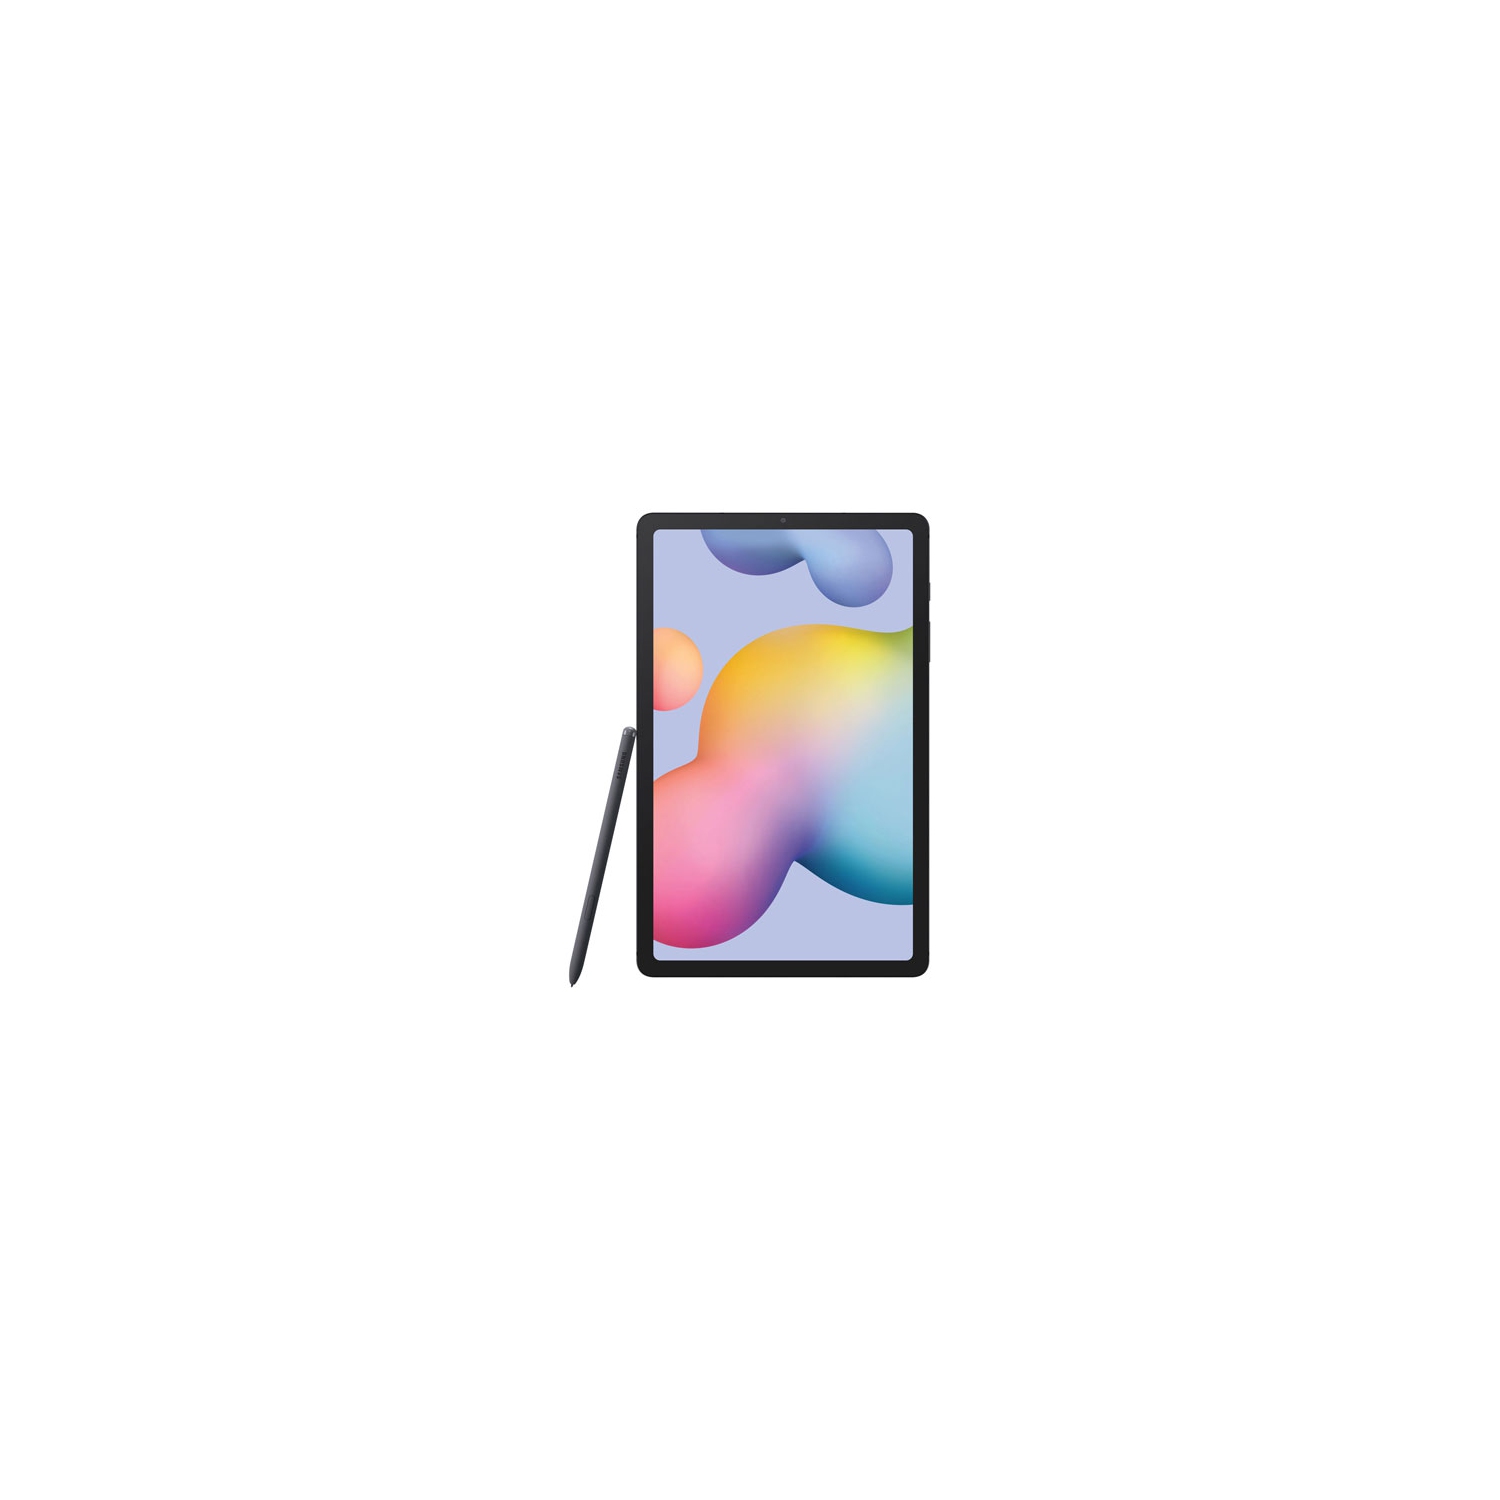 Refurbished (Excellent) - Samsung Galaxy Tab S6 Lite 10.4" 128GB Android 12 Tablet with Snapdragon 720G 8-Core Processor - Grey